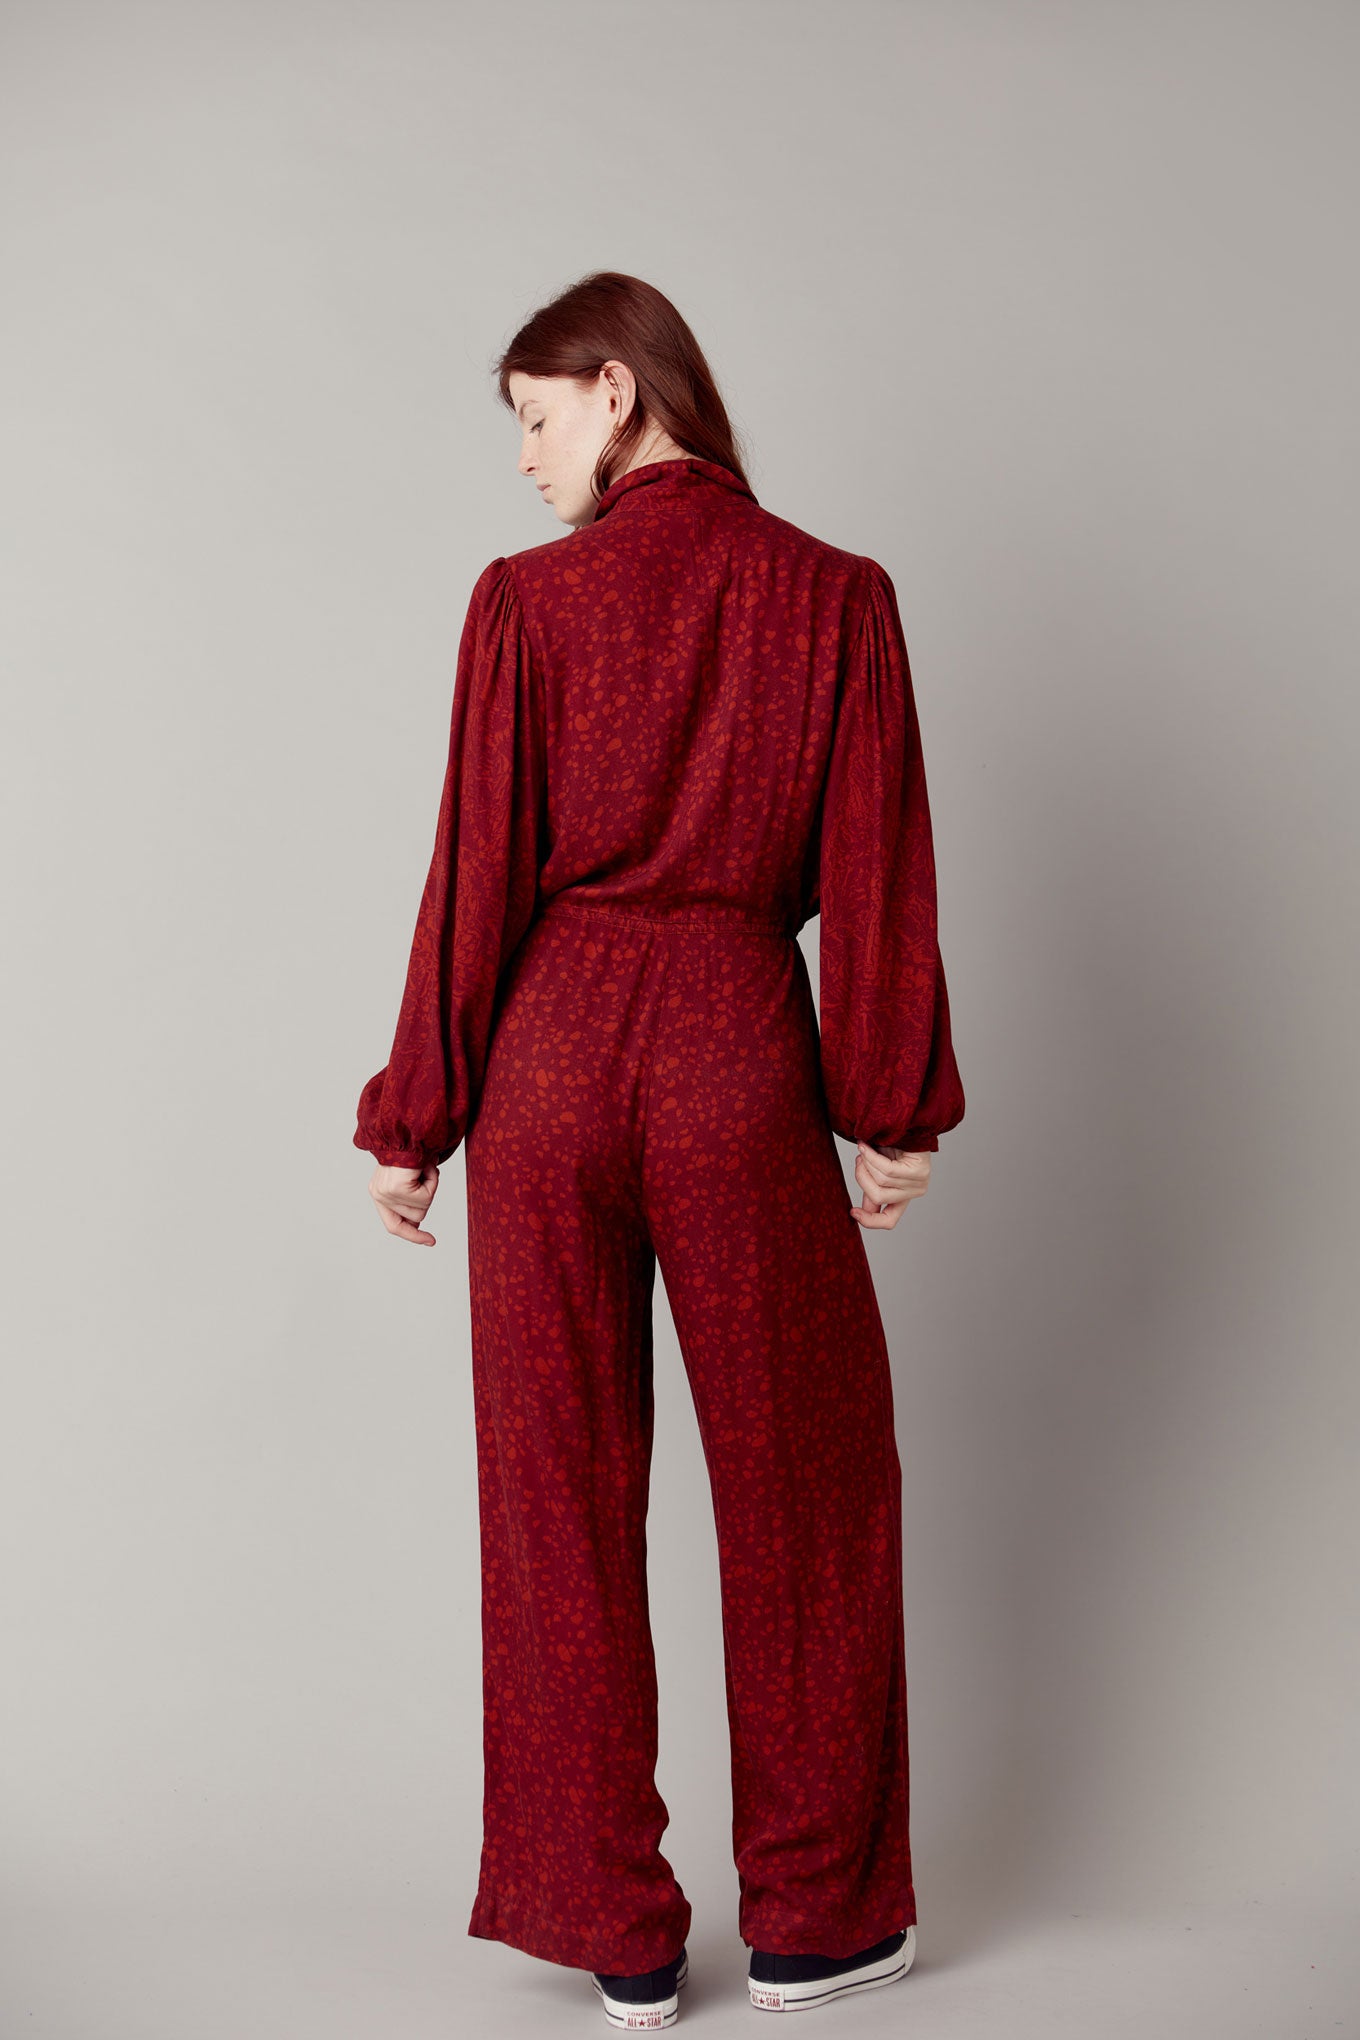 AVA - Rayon Jumpsuit Wine Red